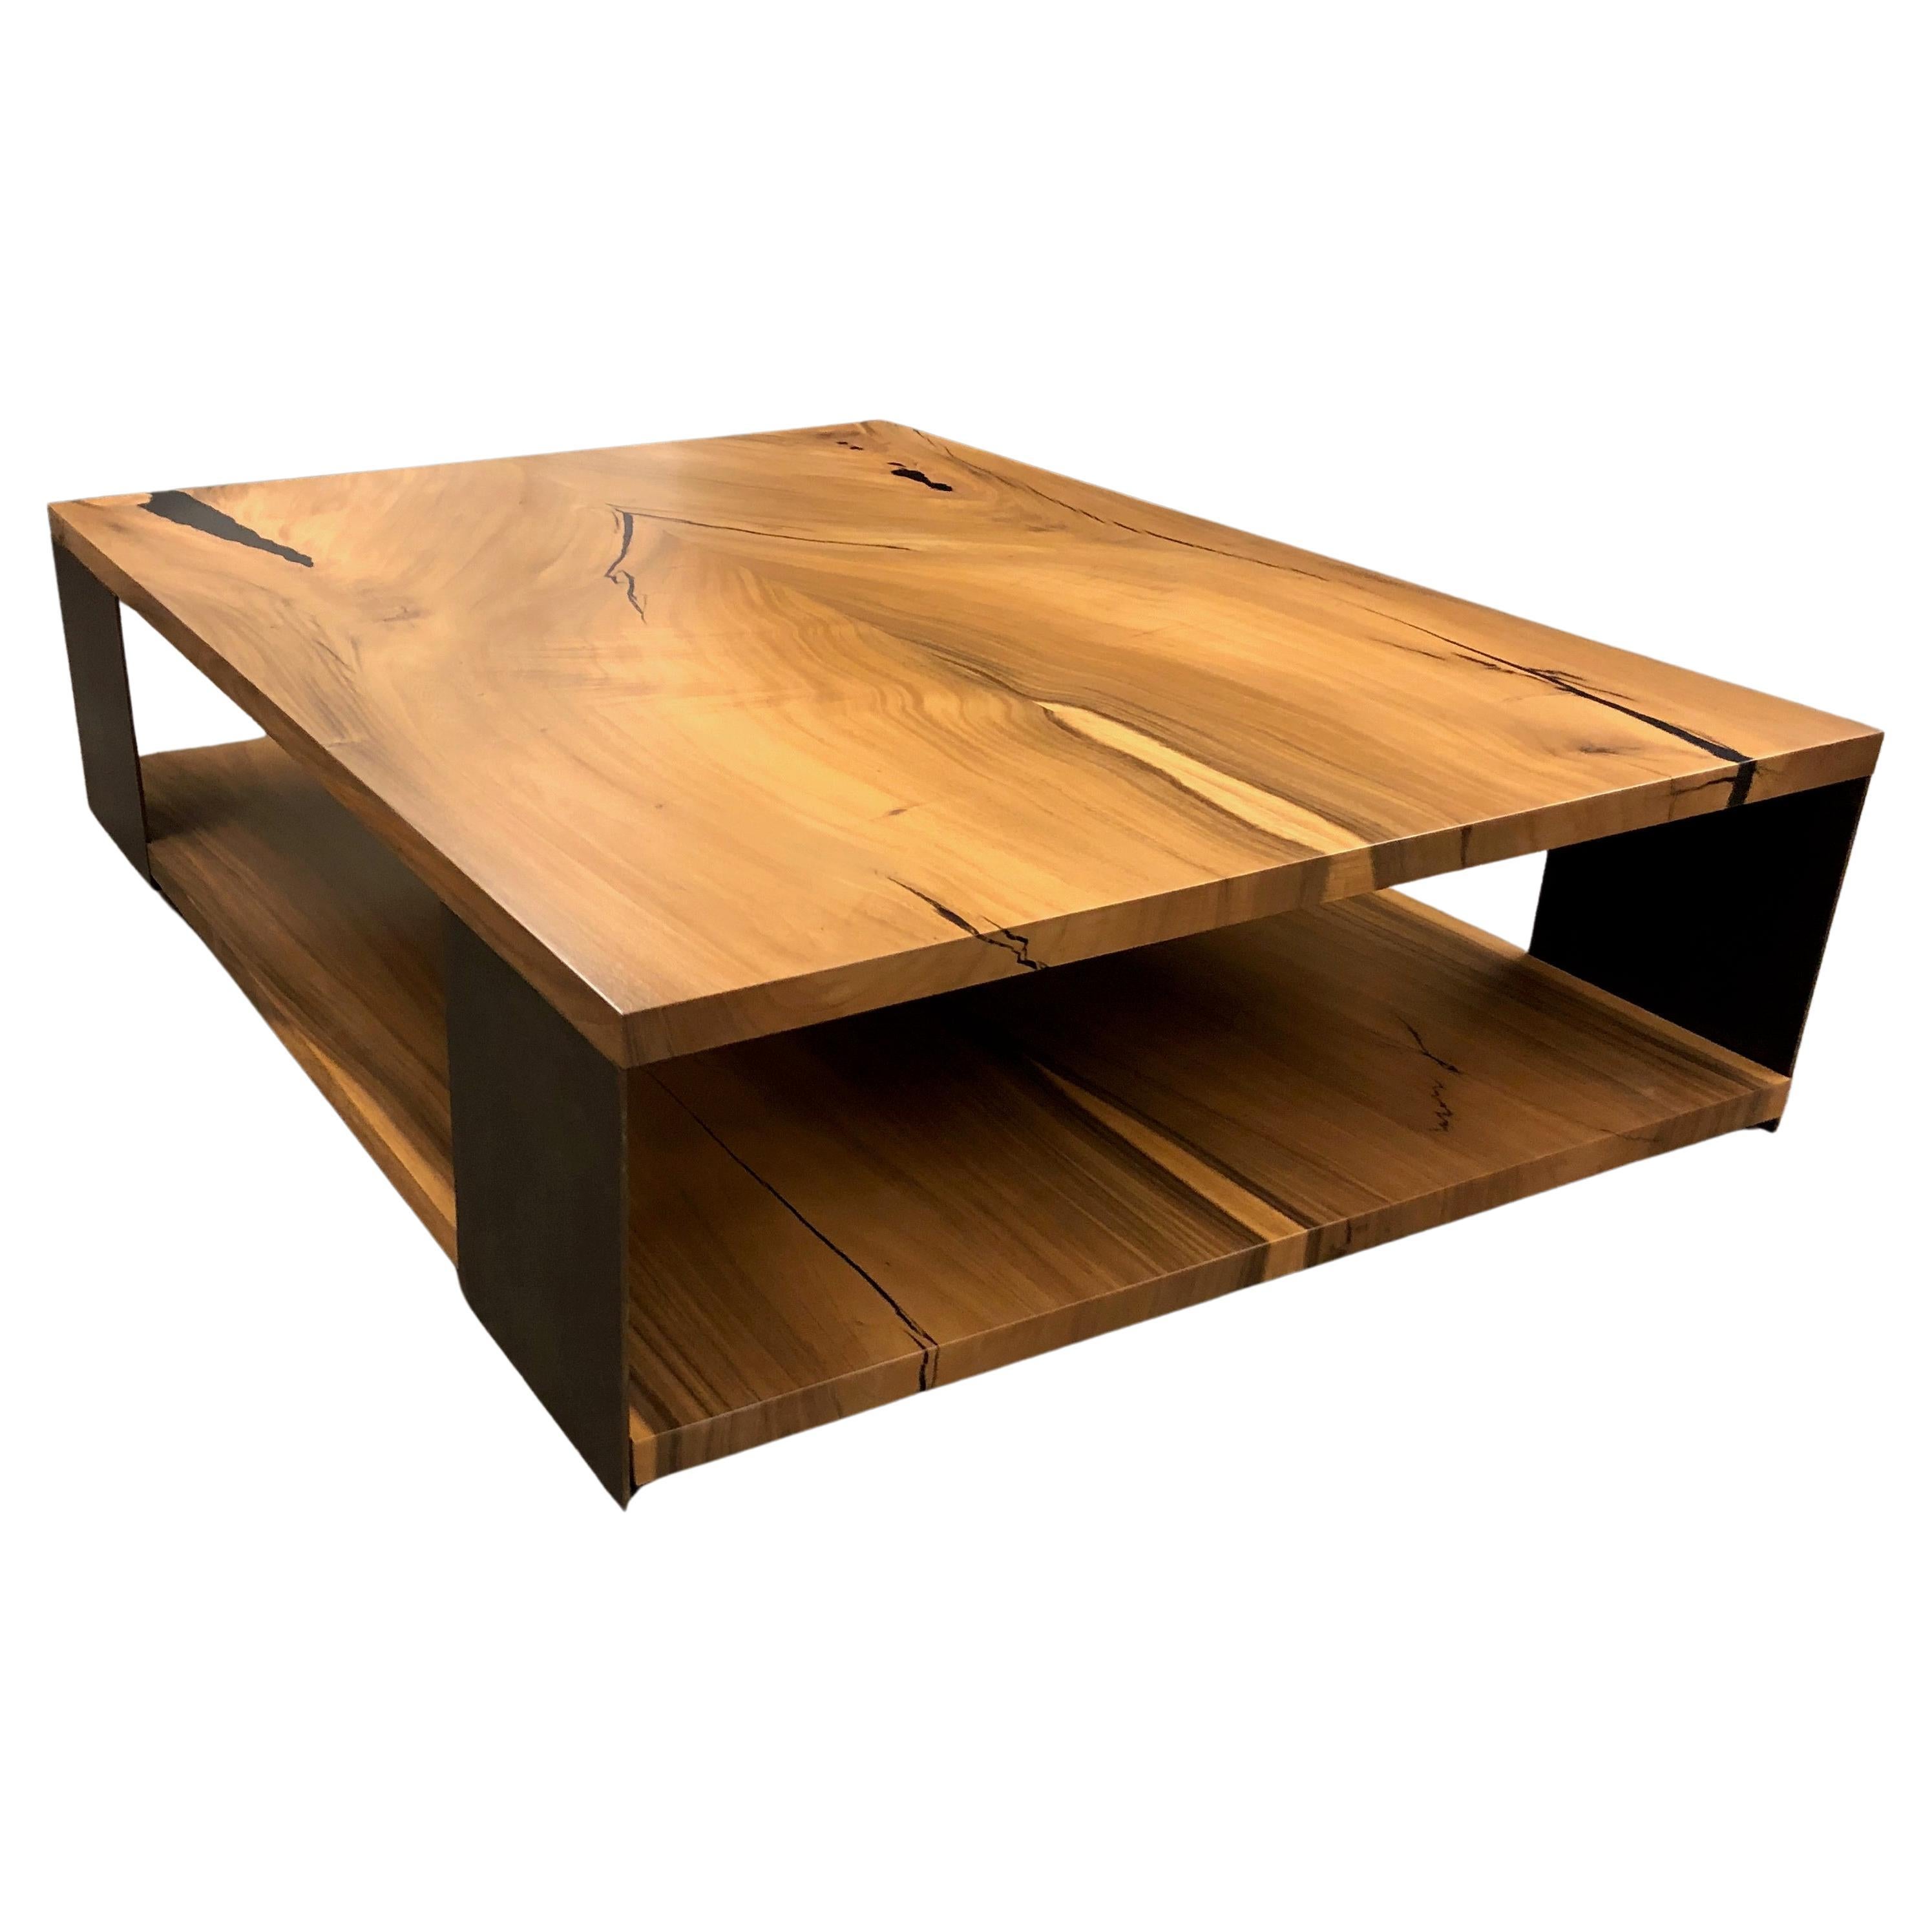 Giant two level bookmatched monkeypod coffee table with steel legs For Sale